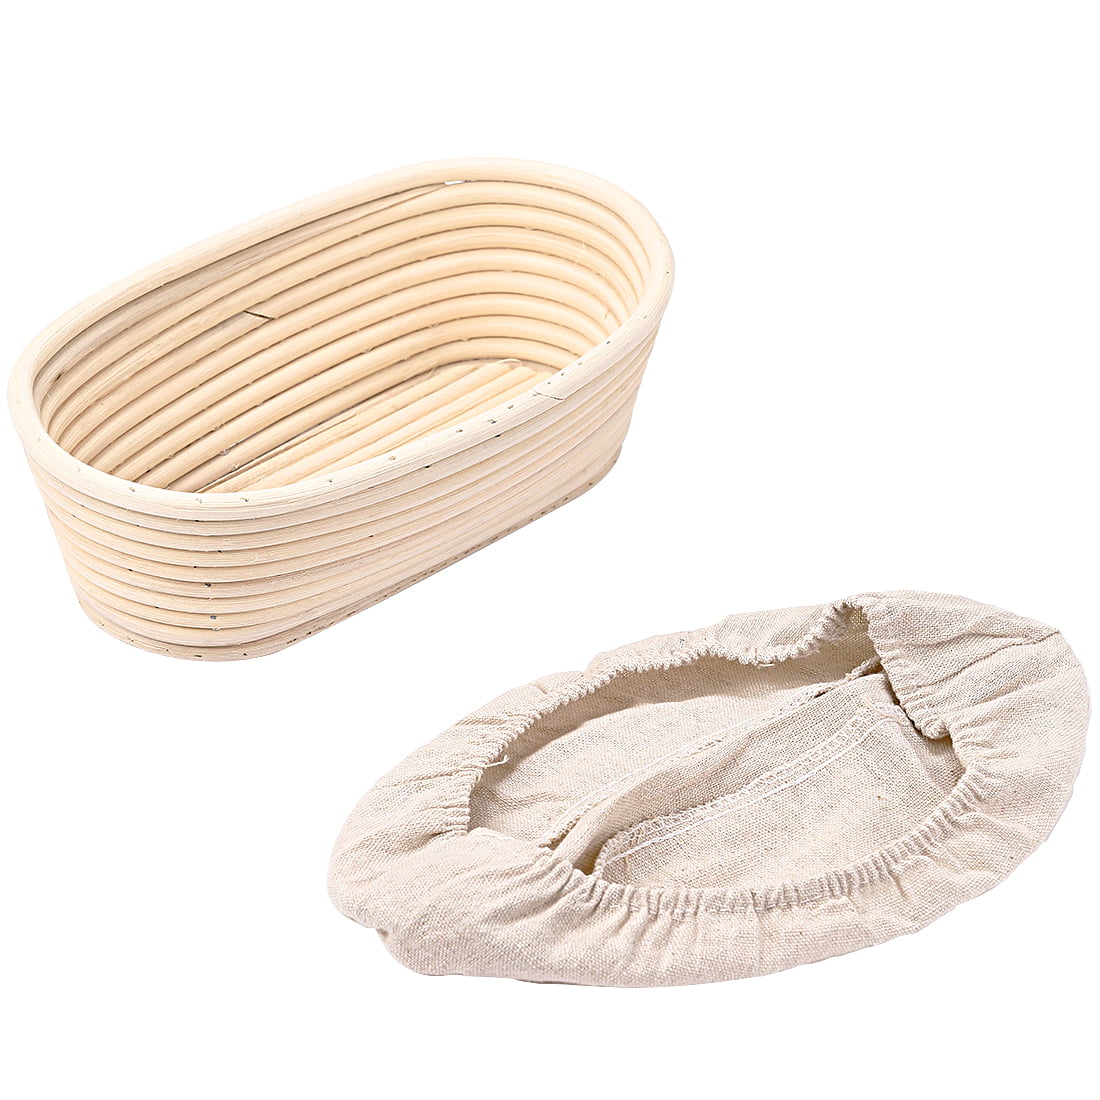 Round Banneton 10 Inch Natural Rattan Sourdough Proving Basket Round Bread proofing Basket Set with Digital Scales 25cm 